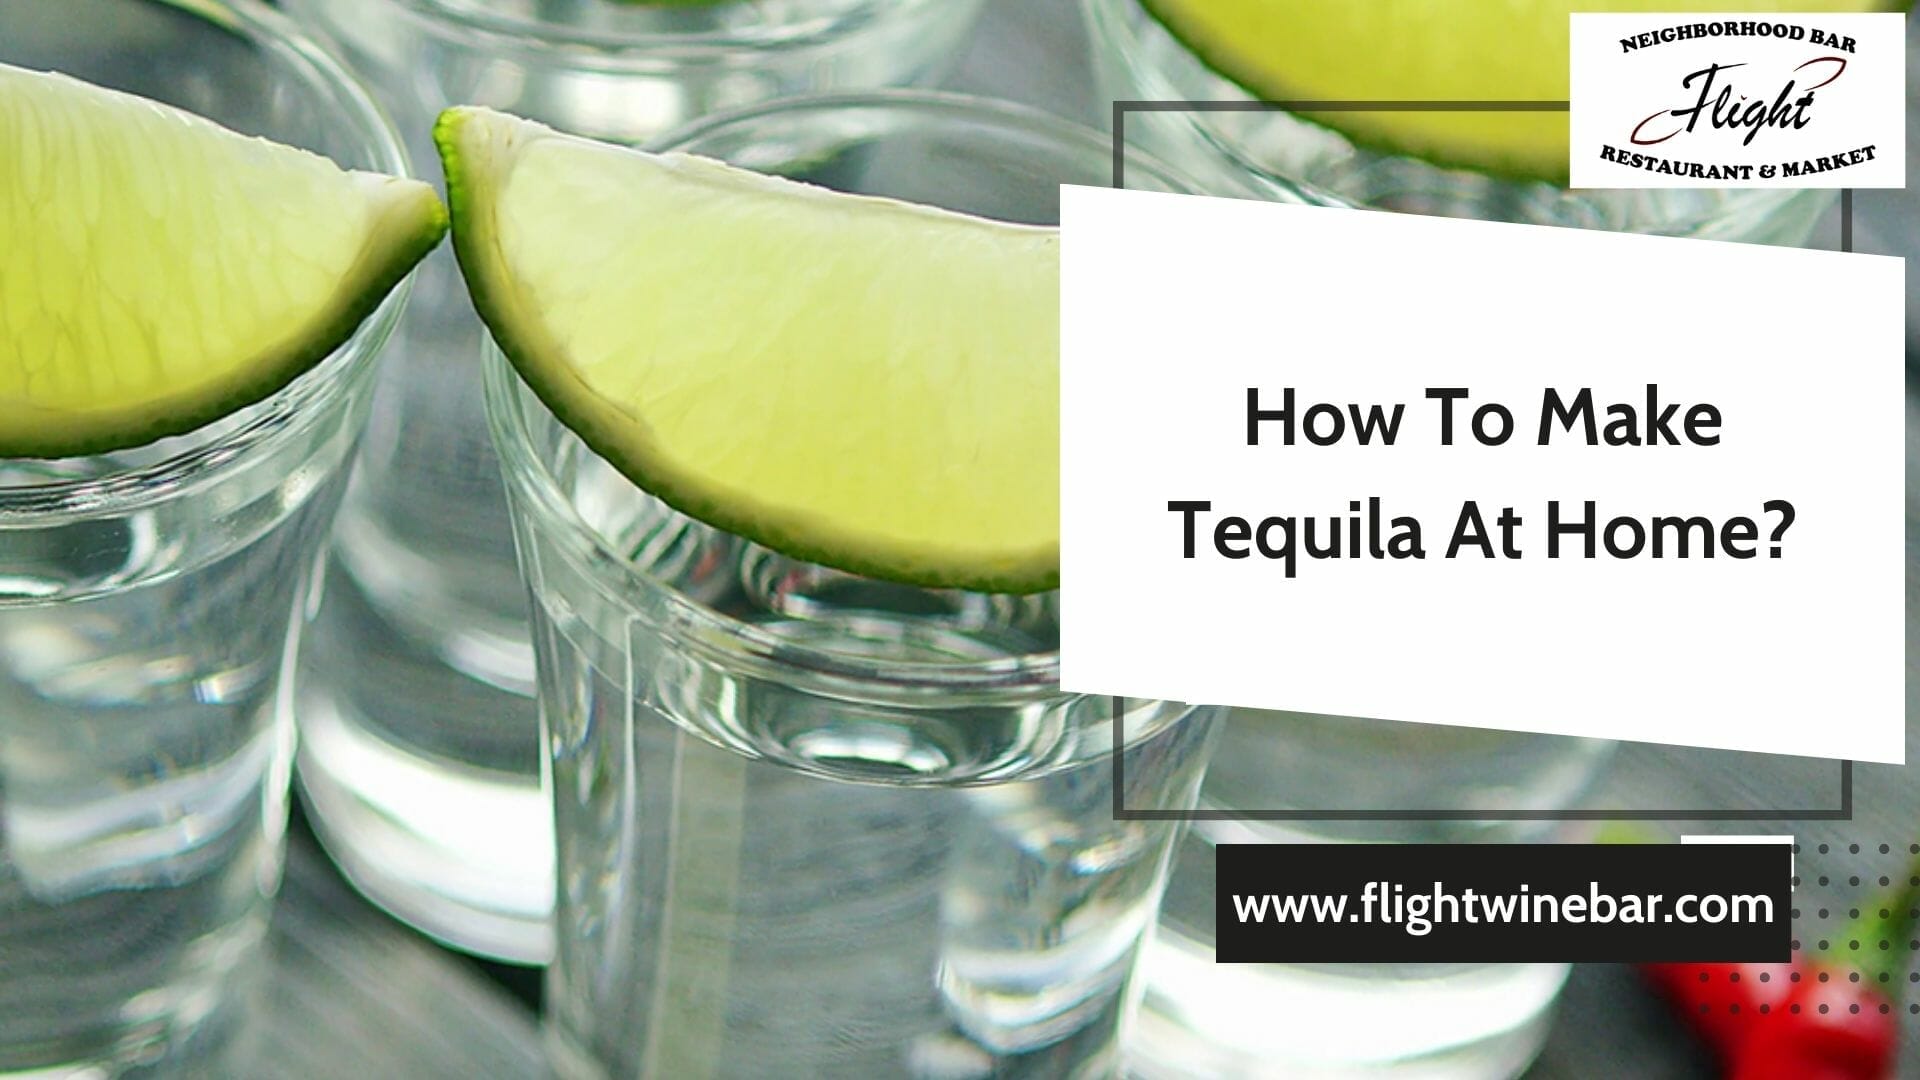 How To Make Tequila At Home